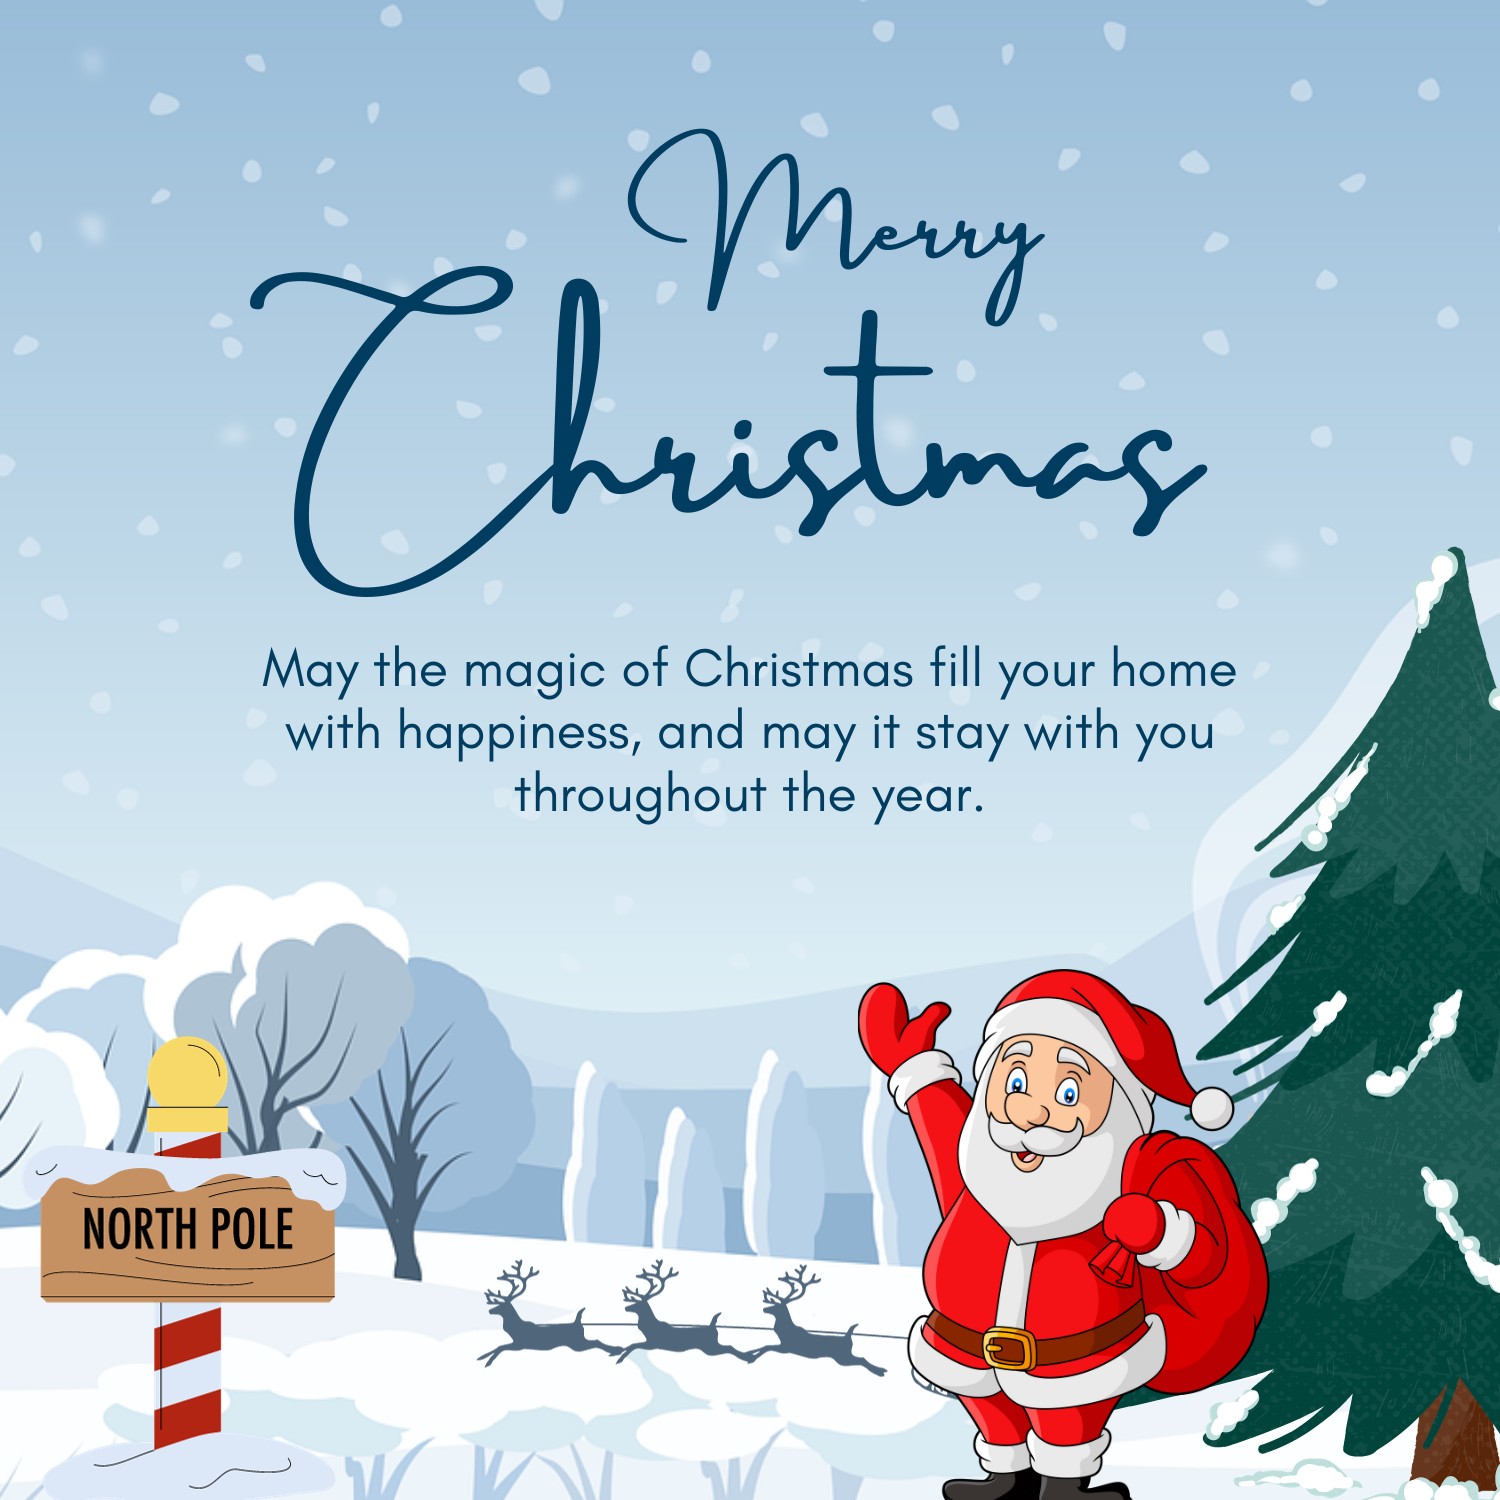 Merry Christmas Cards and wishes only for $4 cover image.